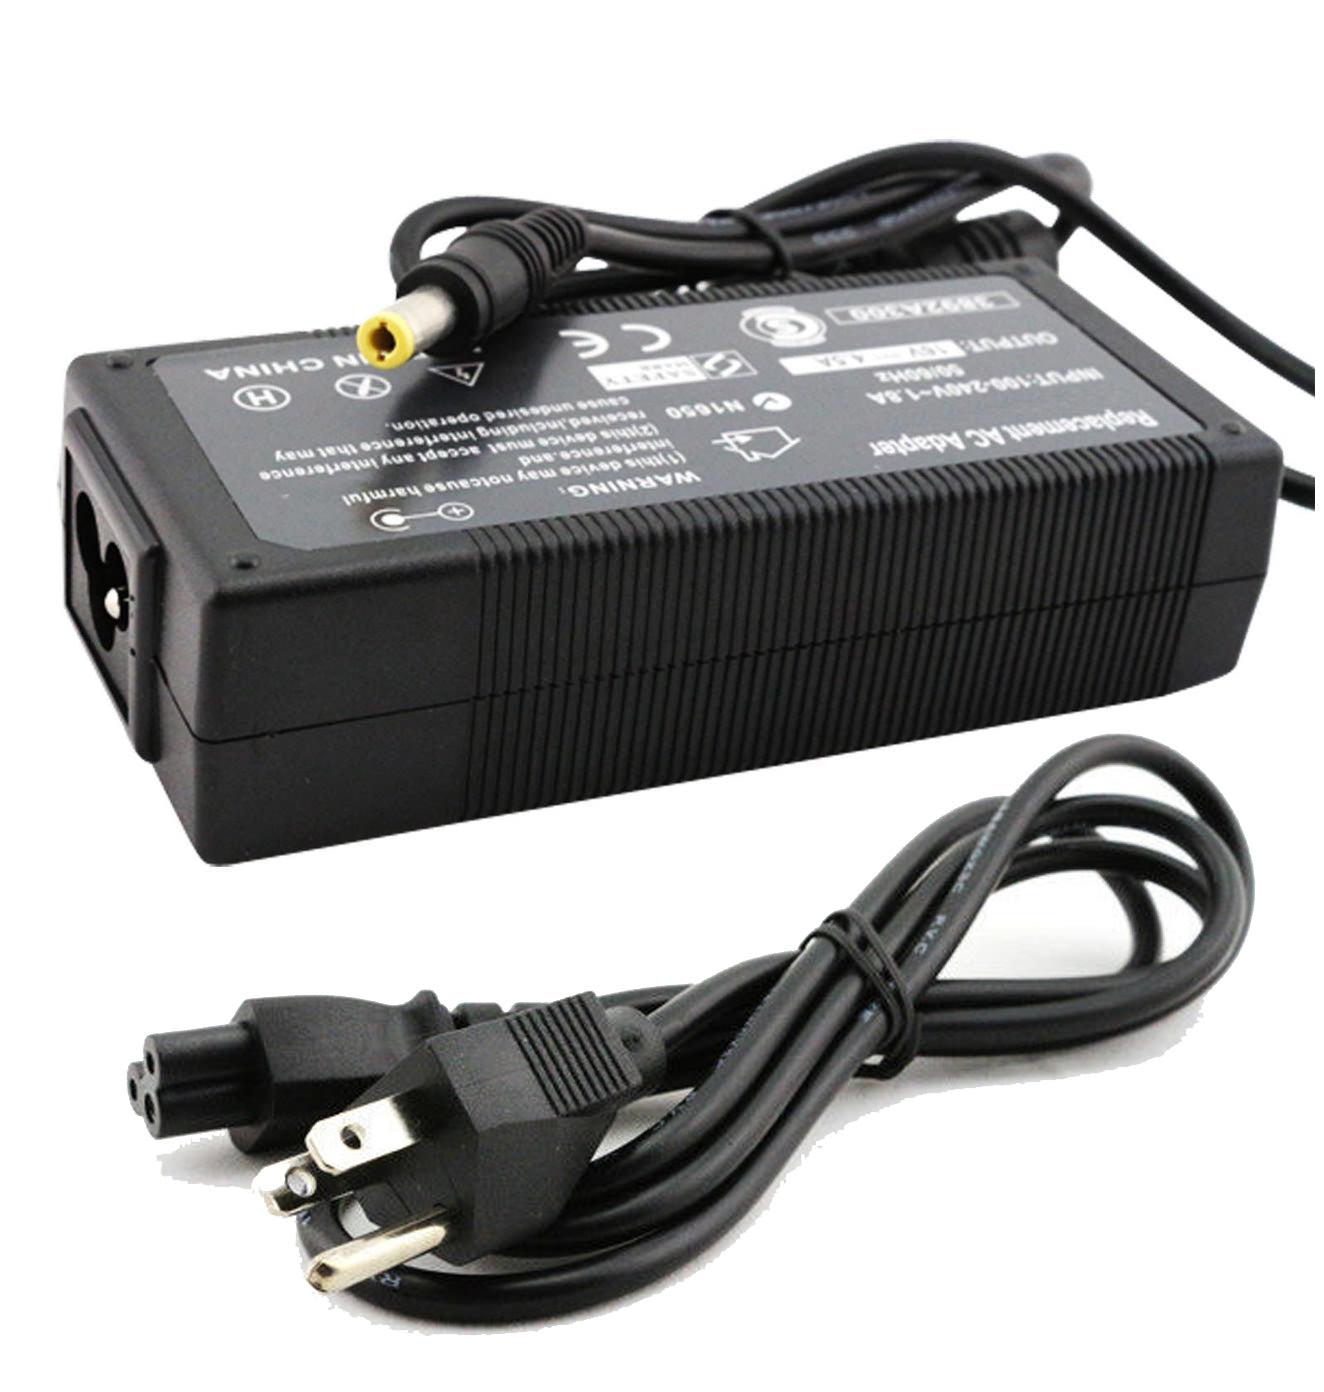 AC Adapter Charger for Panasonic Toughbook CF-53 Notebook.